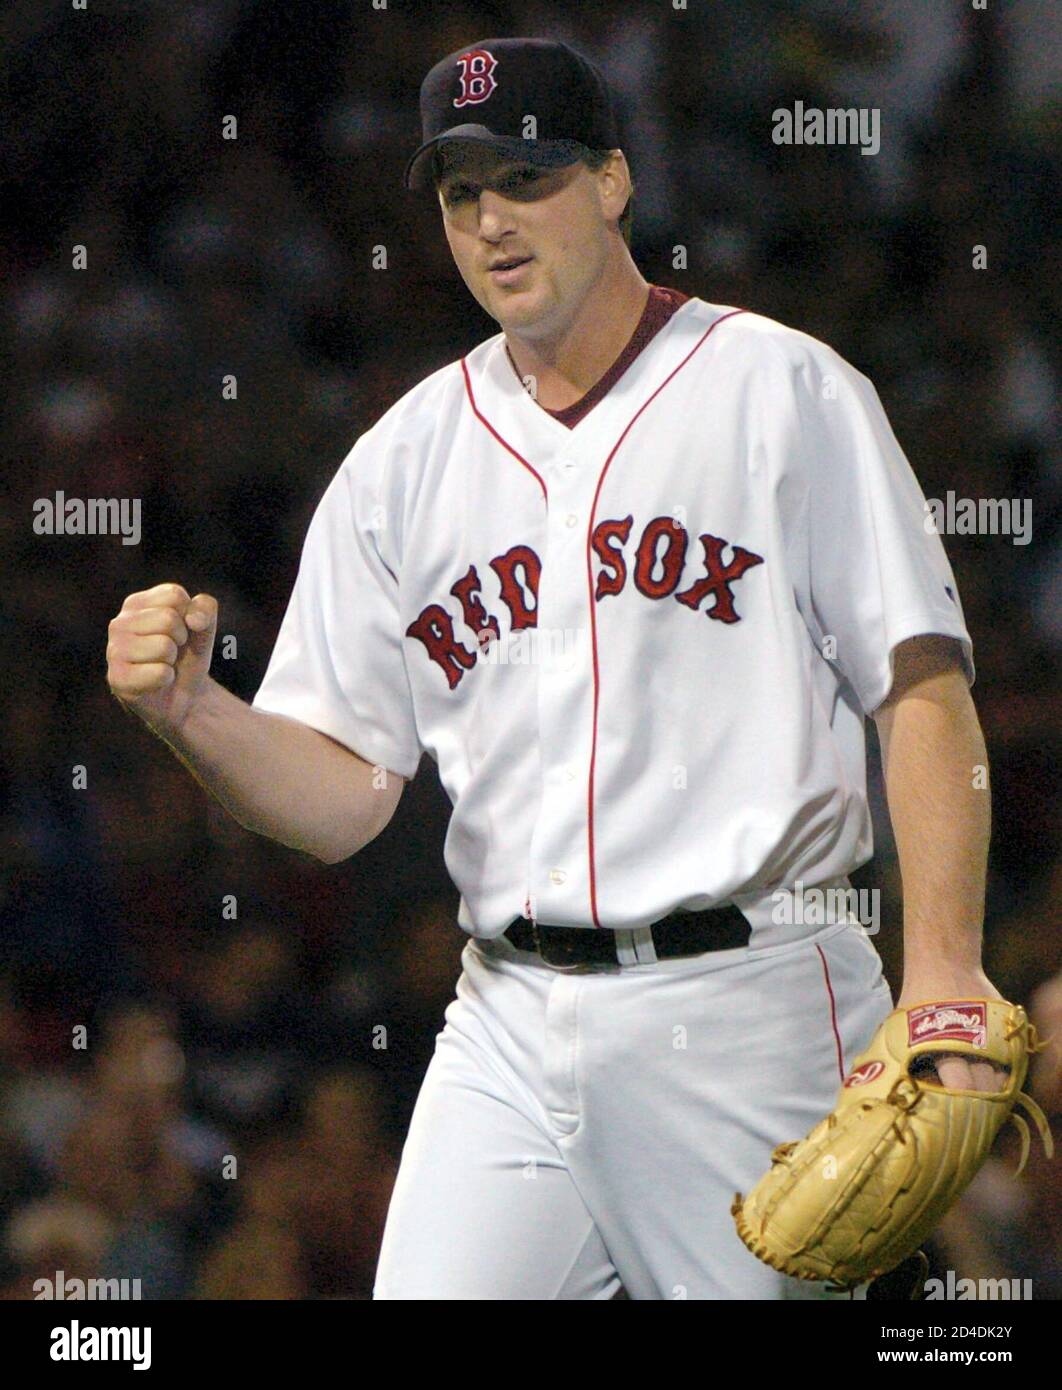 Boston Red Sox Pitcher Derek Lowe pumps his fist in the sixth inning  against the Los Angeles Dodgers at Fenway Park in Boston, Massachusetts June  11, 2004. Lowe pitched seven scoreless innings